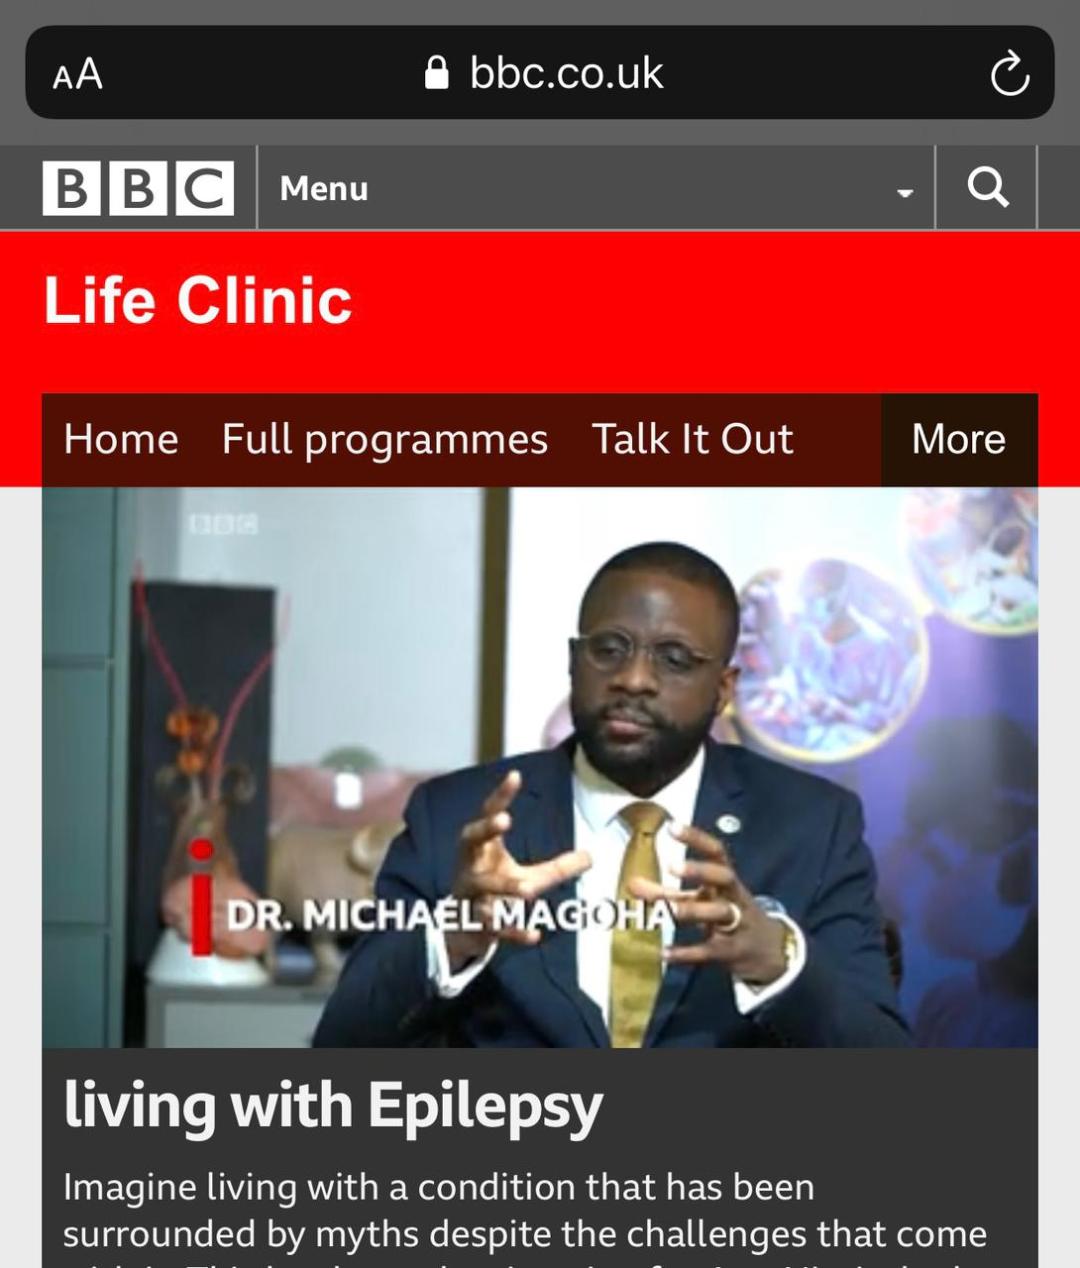 Lecturer Dr Michael Magoha featured on BBC TV